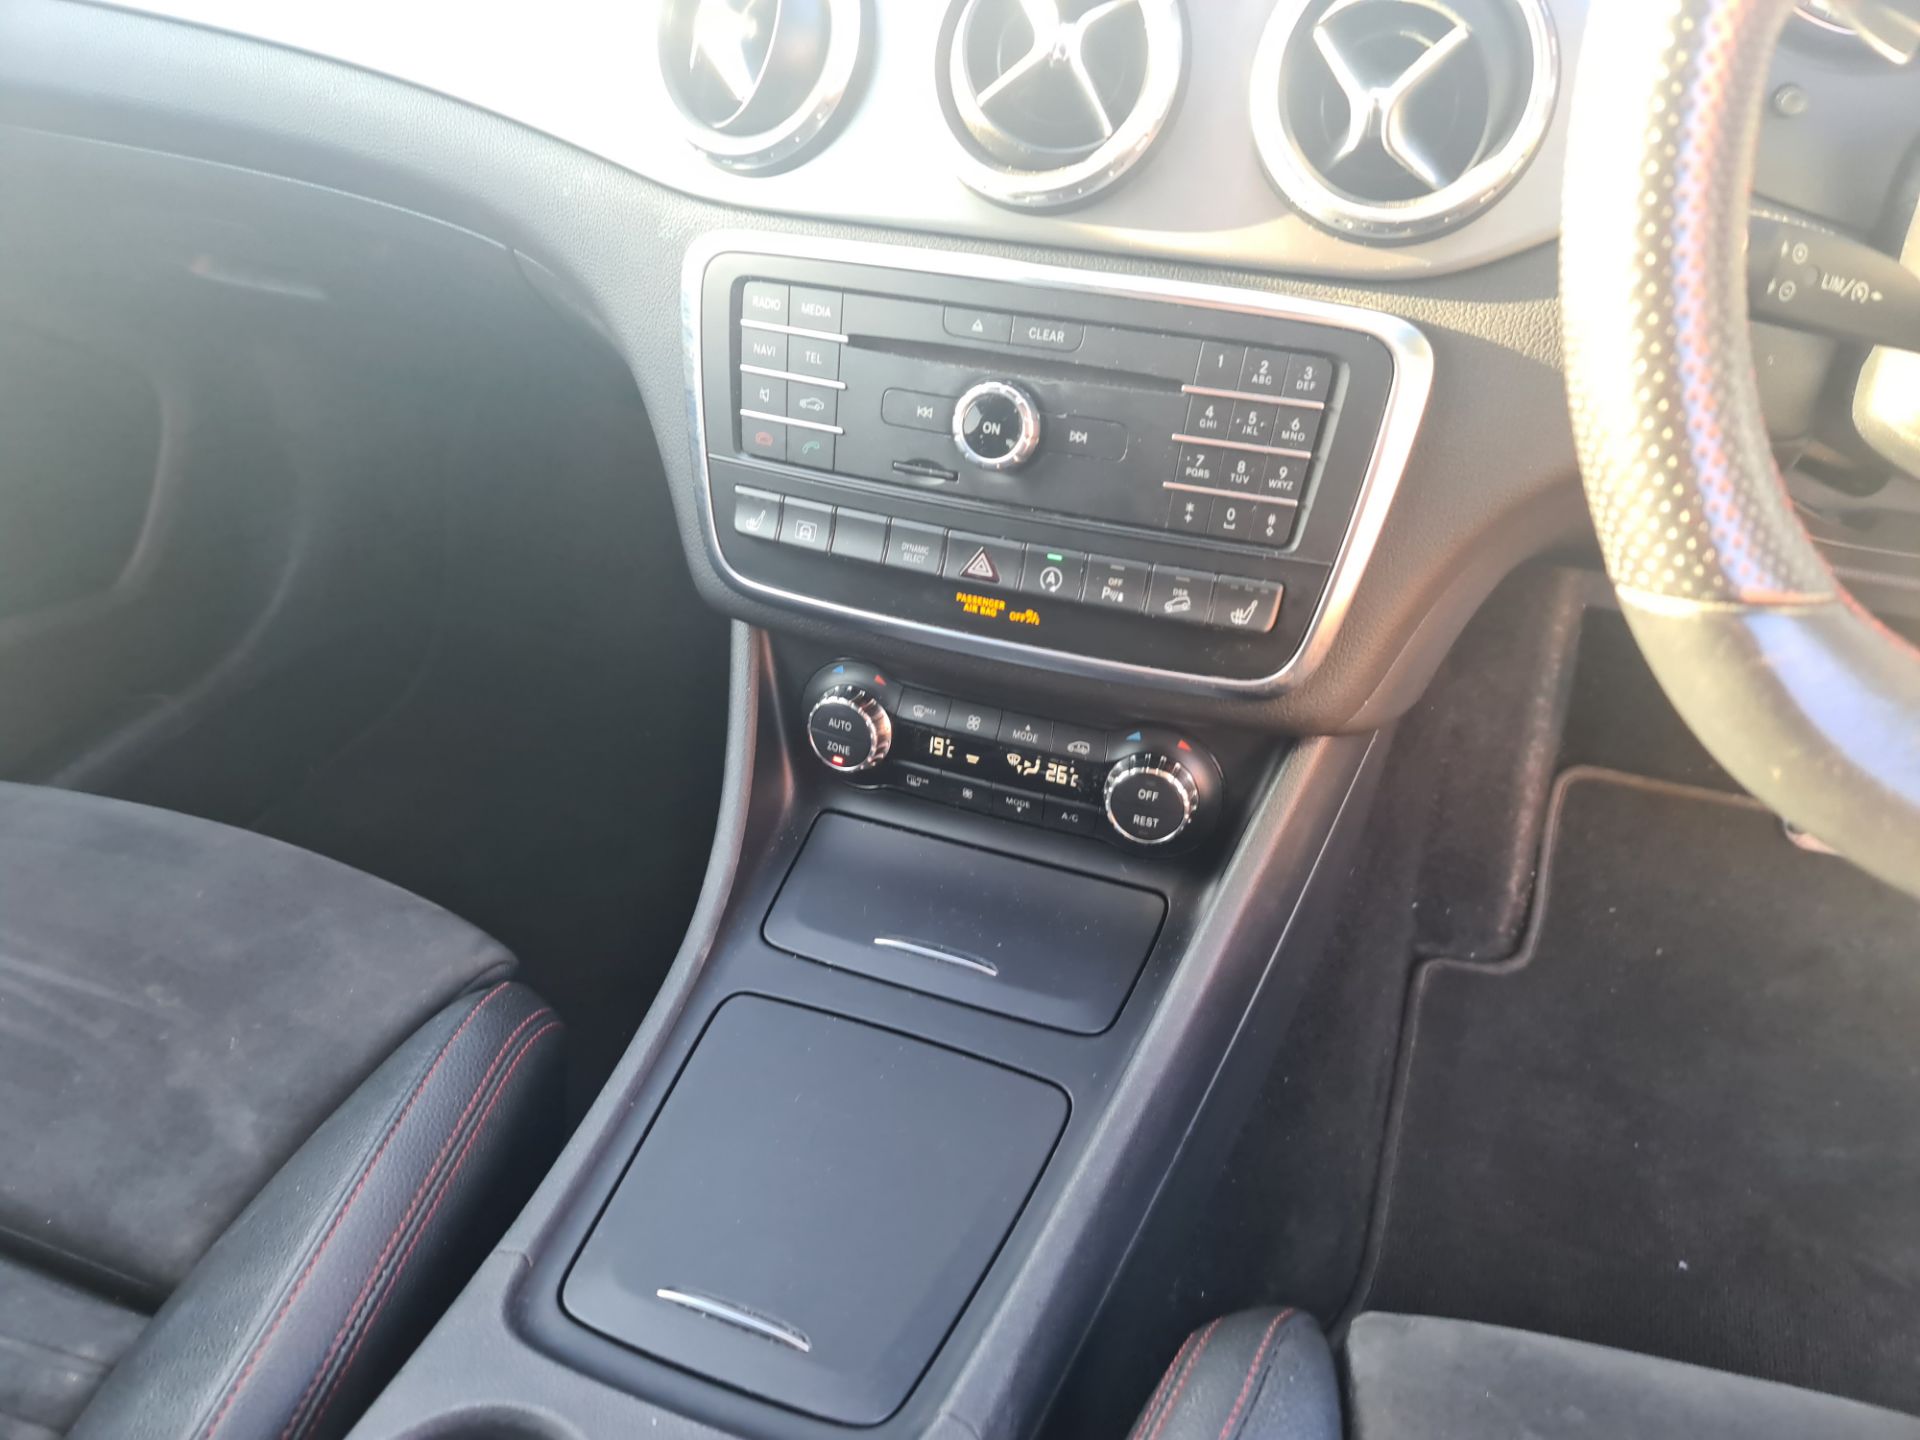 MD66 ODJ Mercedes GLA 220D 4Matic AMG Line Premium A car, 7 speed auto gearbox, 2143cc diesel engine - Image 22 of 98